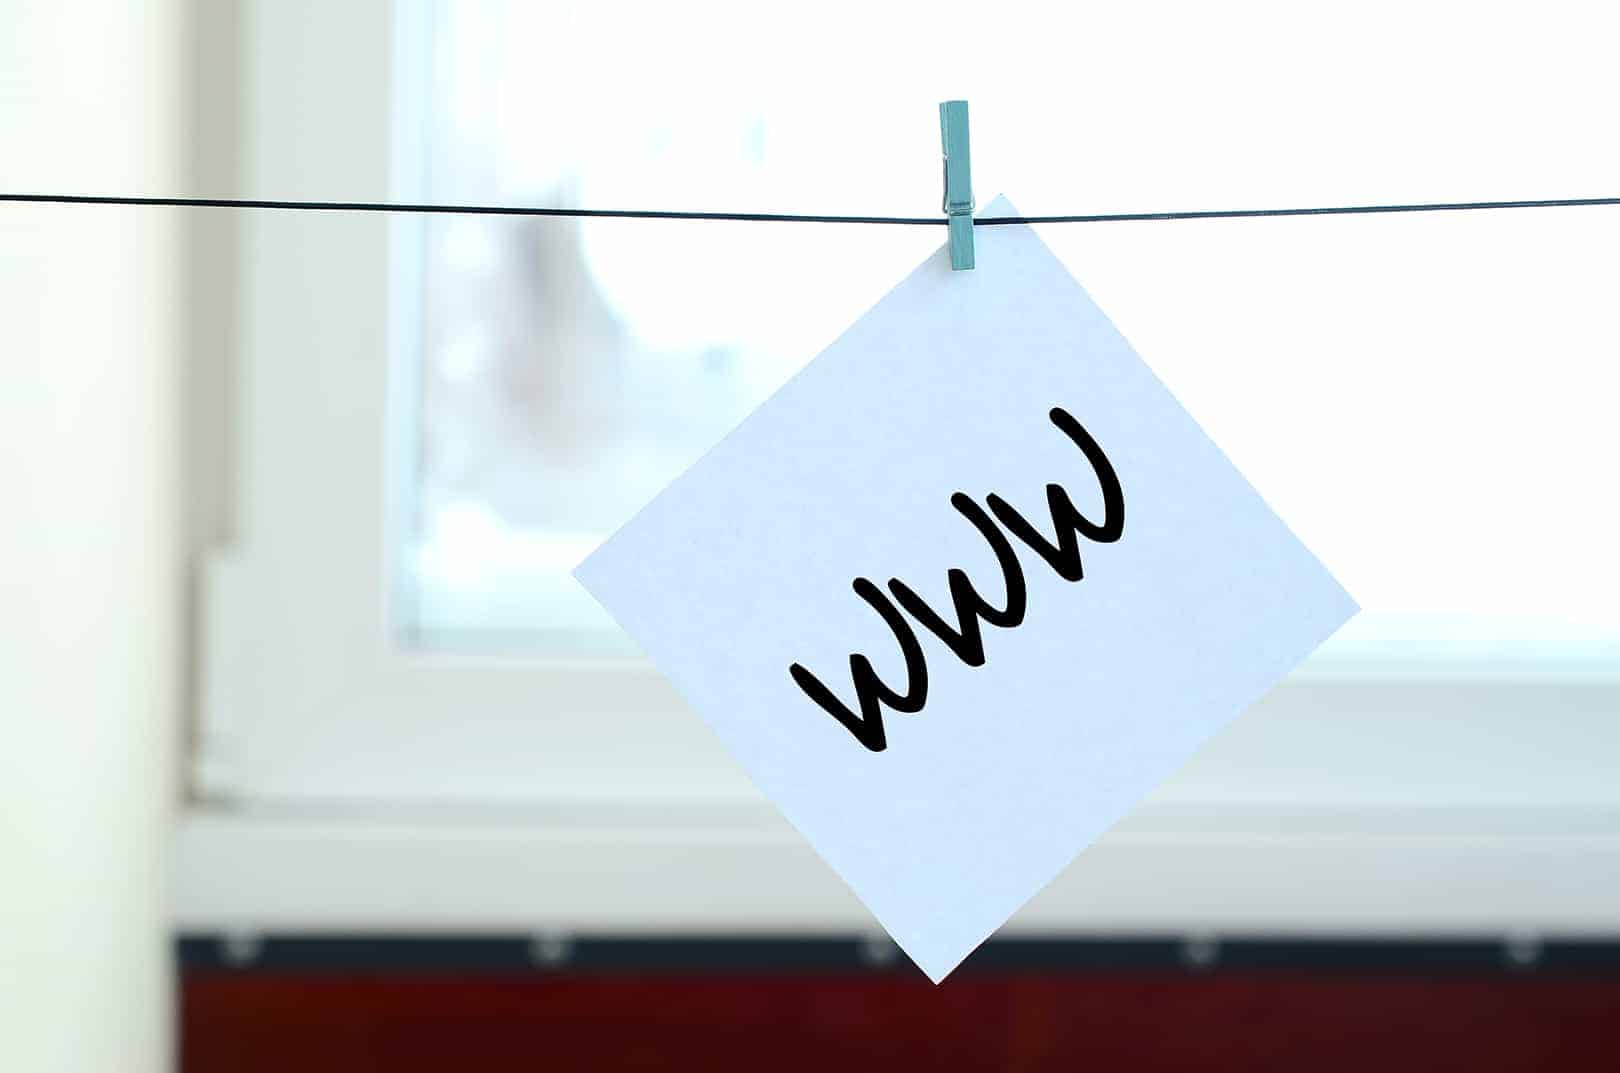 www. note is written on a white sticker that hangs with a clothe